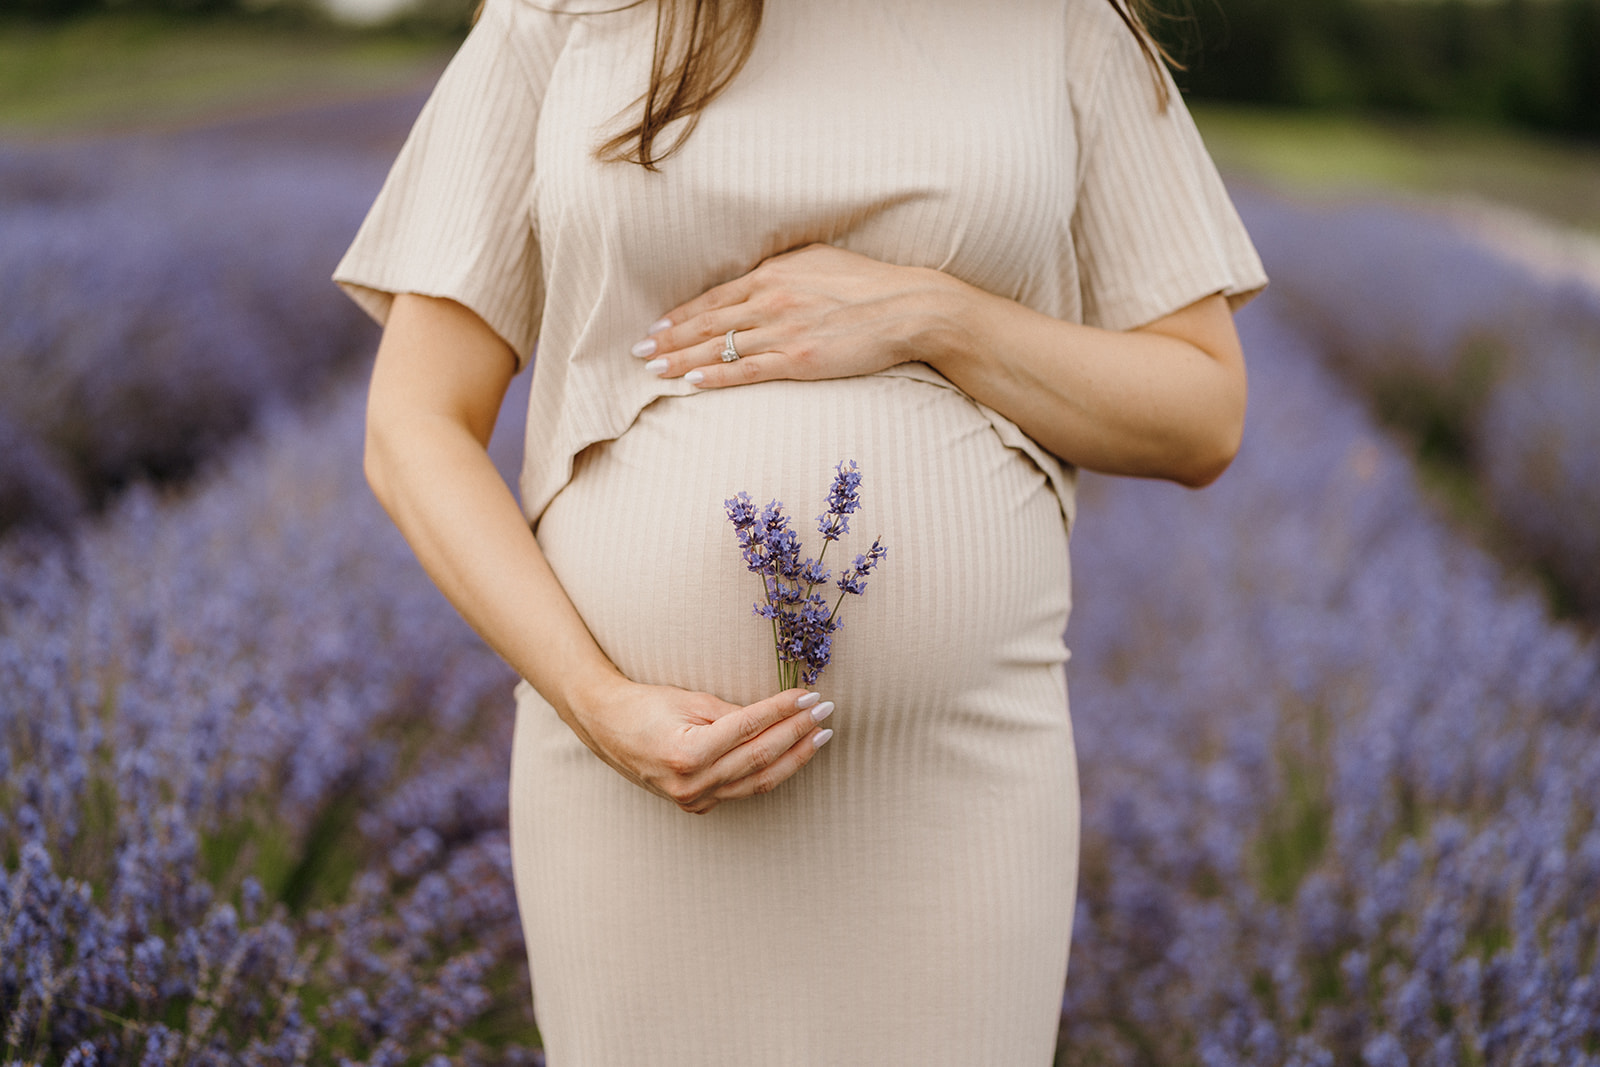 Woman holds a piece of lavender near the bottom of her stomach while resting her other hand on top.